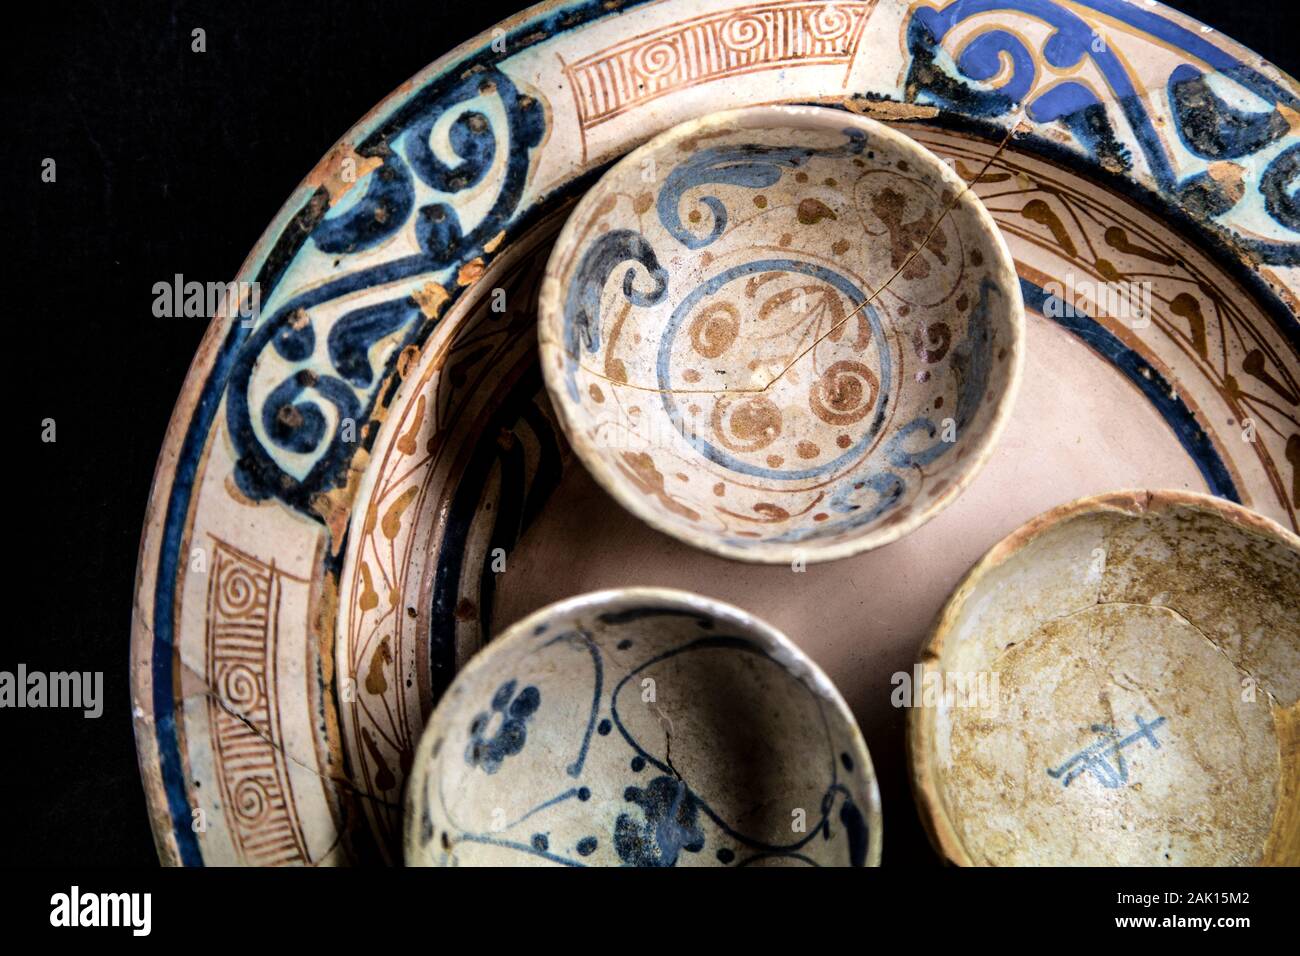 Ceramics on display at the City History Museum Castell de Bellver in Palma, Mallorca, Spain Stock Photo